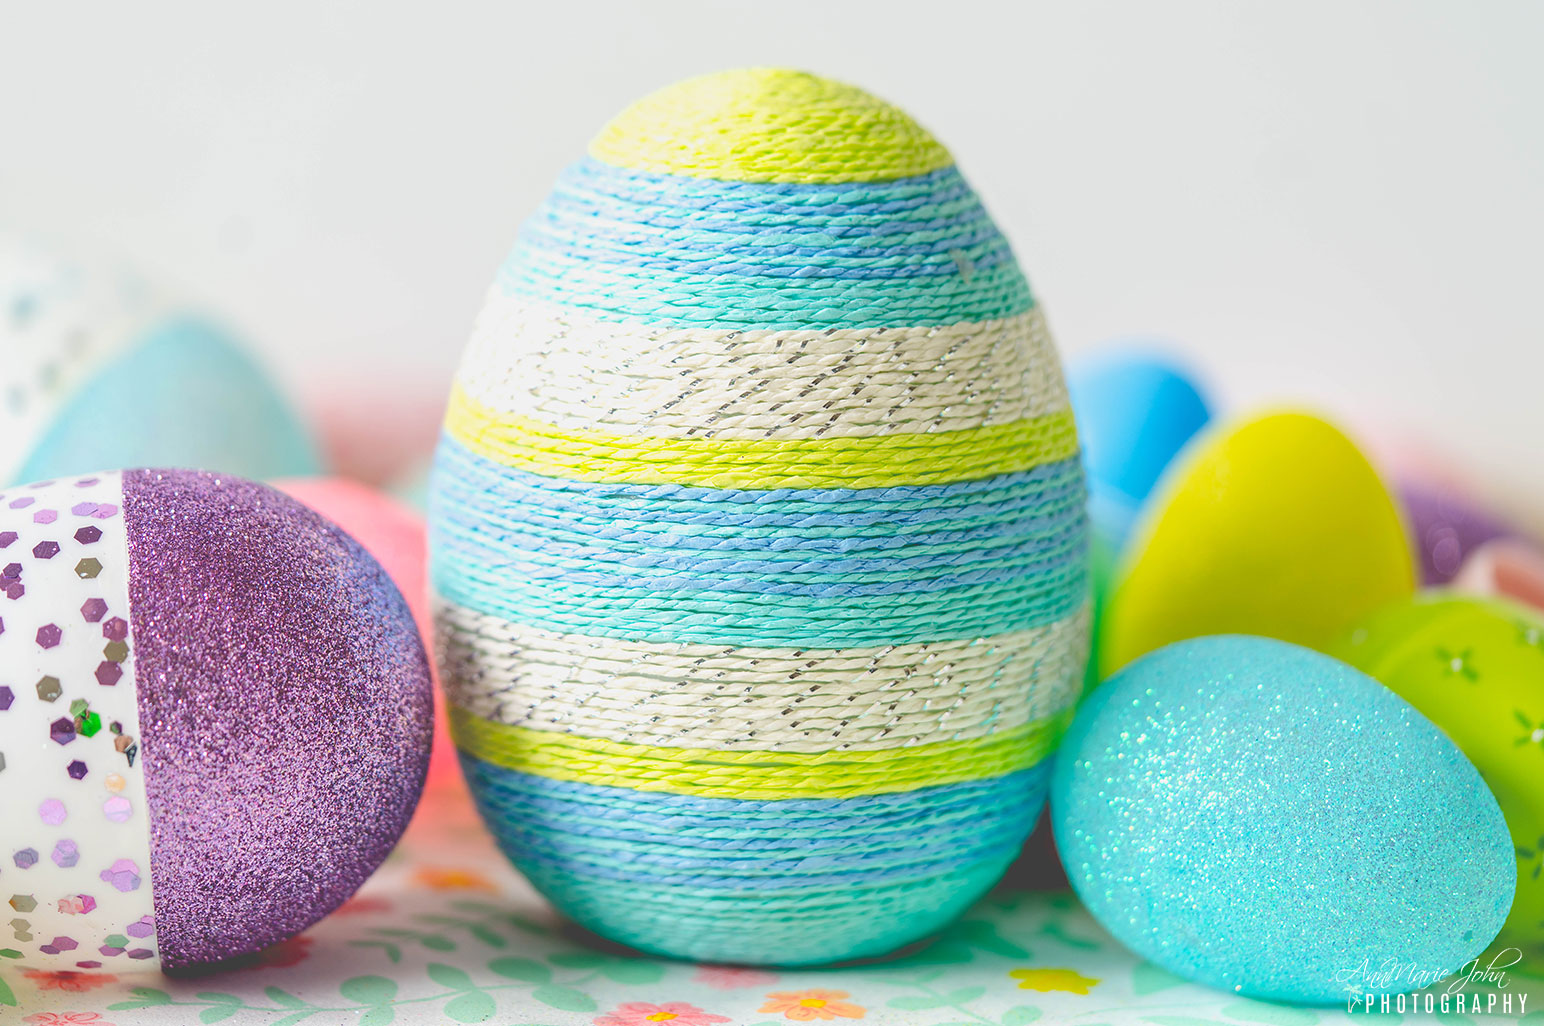 Ways to Decorate Easter Eggs